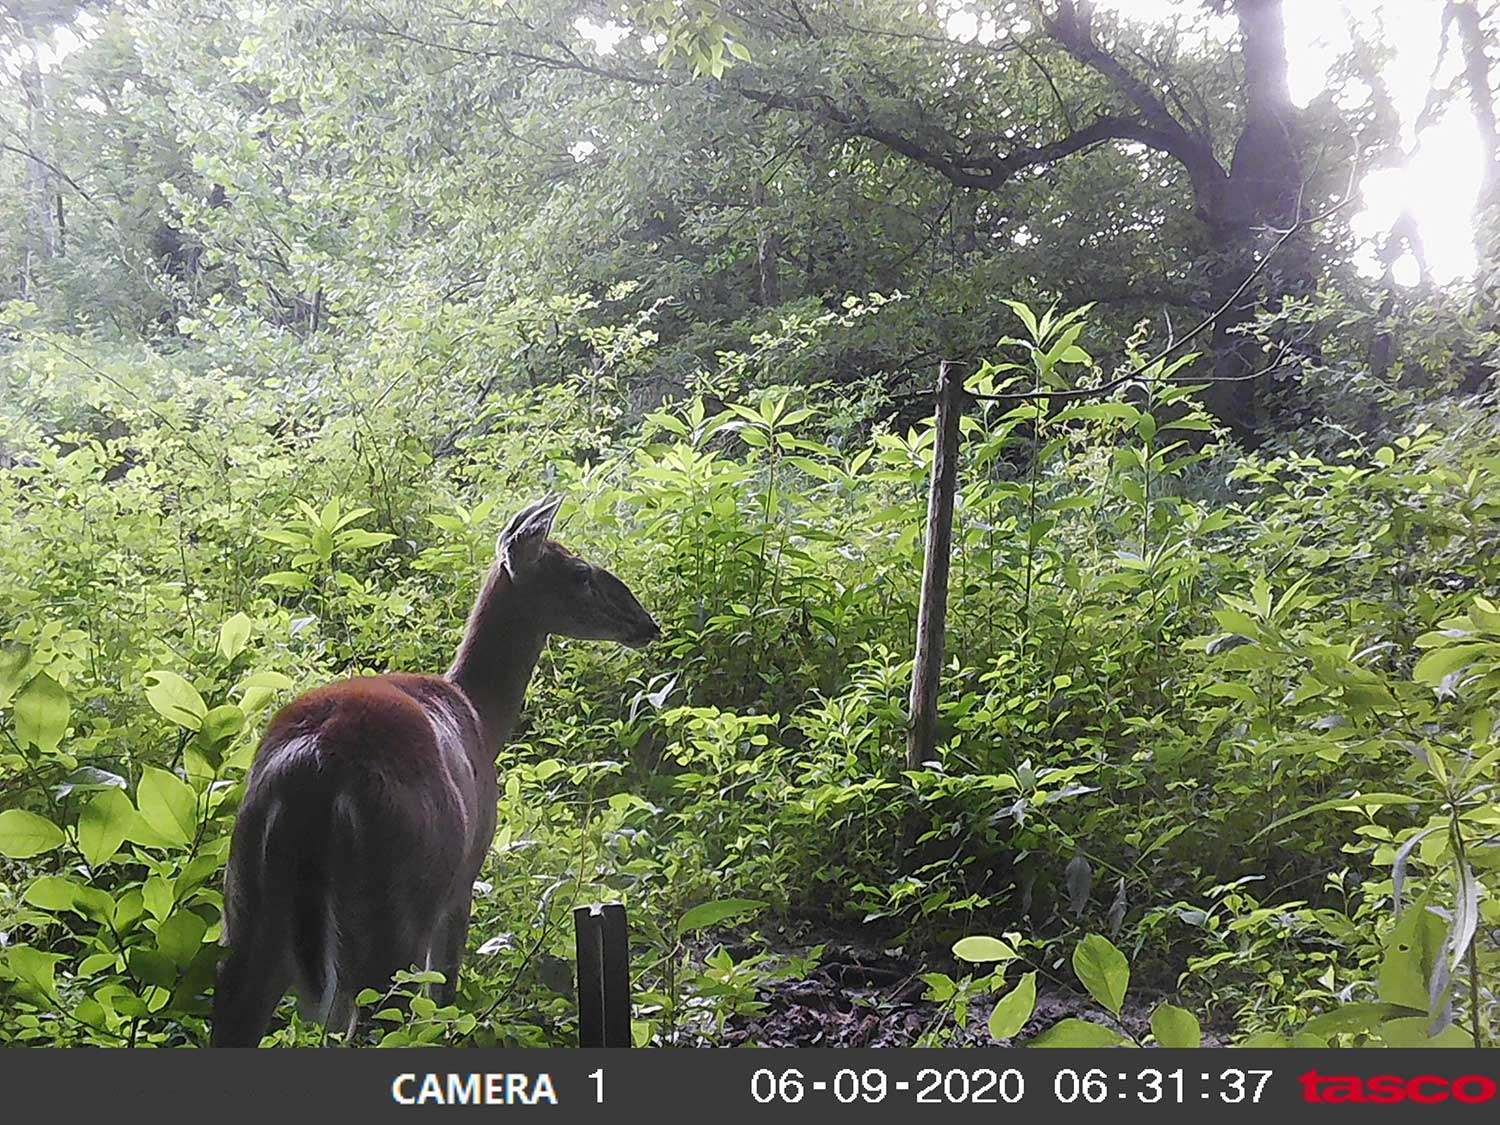 Trail cam footage of a deer in tall grass.